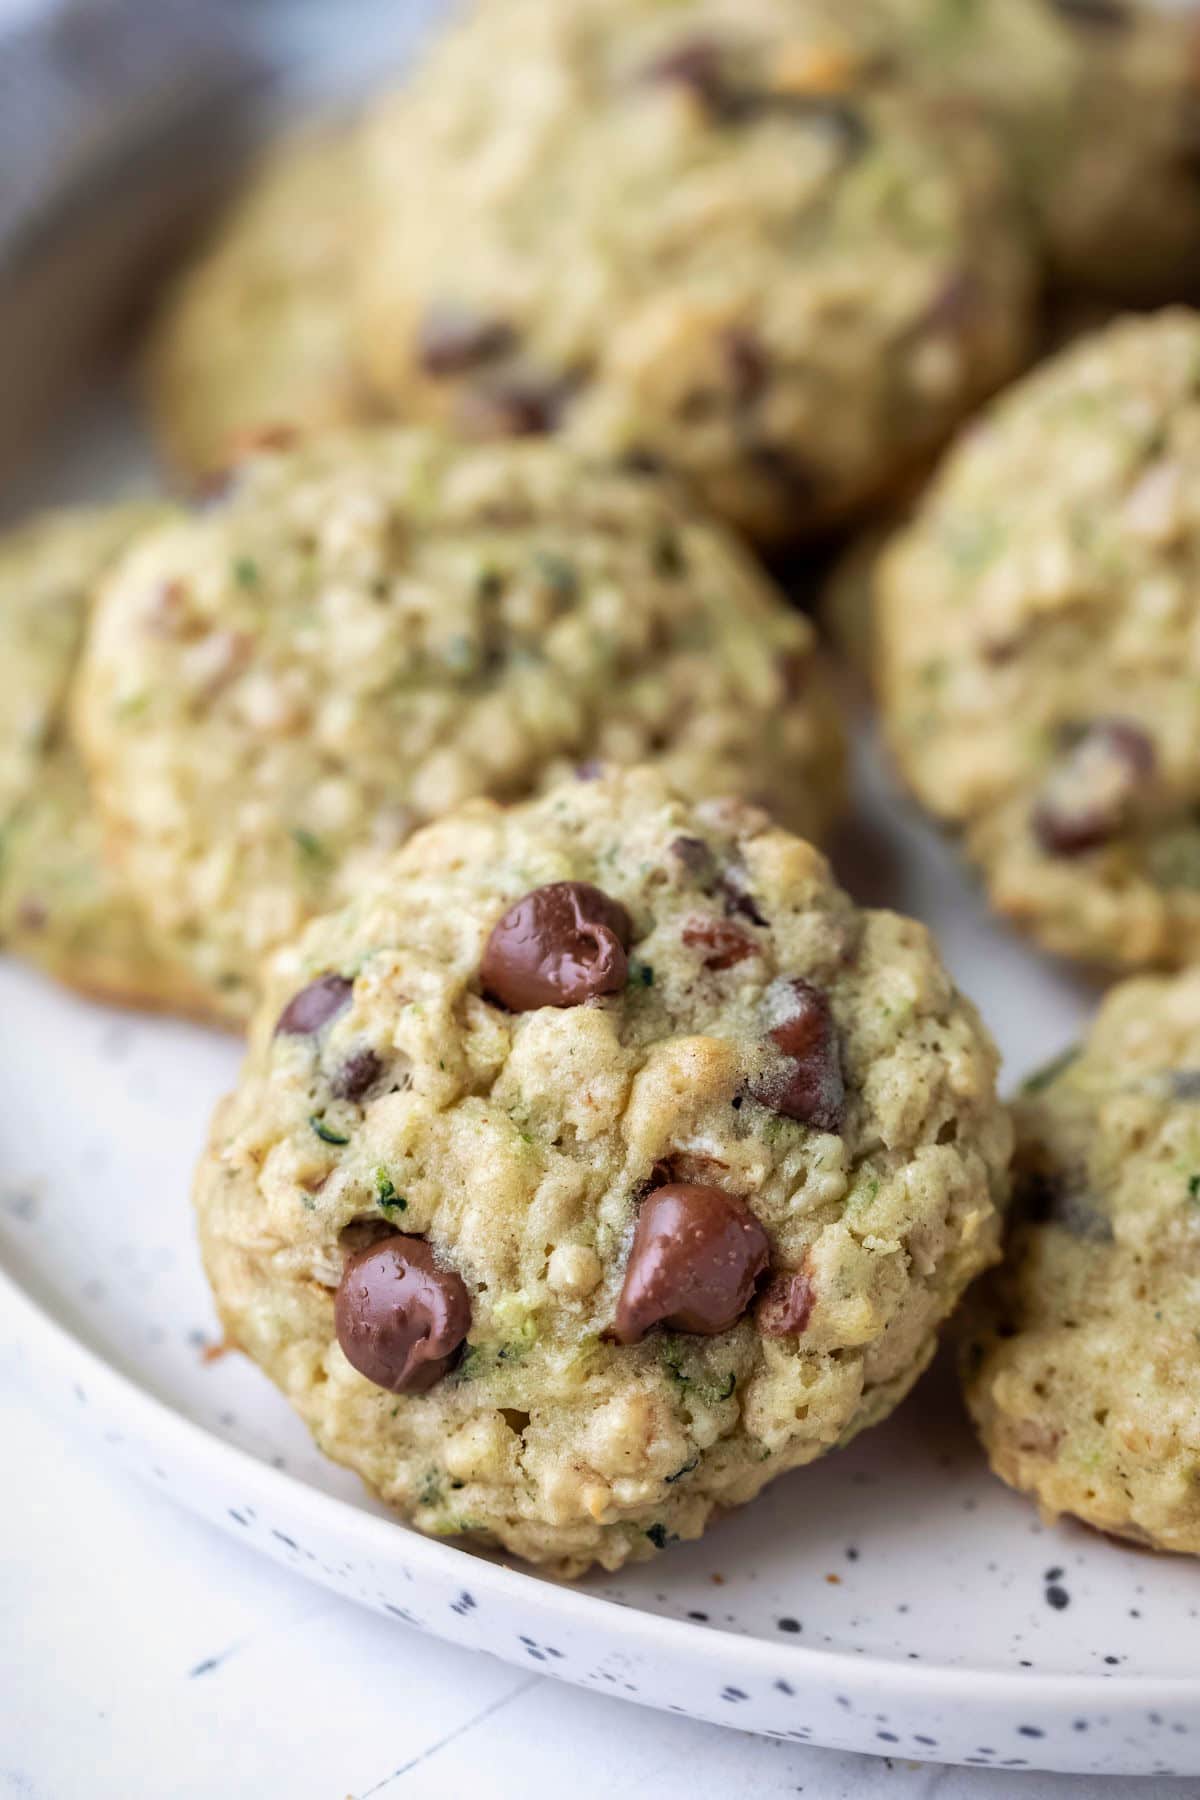 A plate of zucchini chocolate chip cookies with an upright cookie in the front.